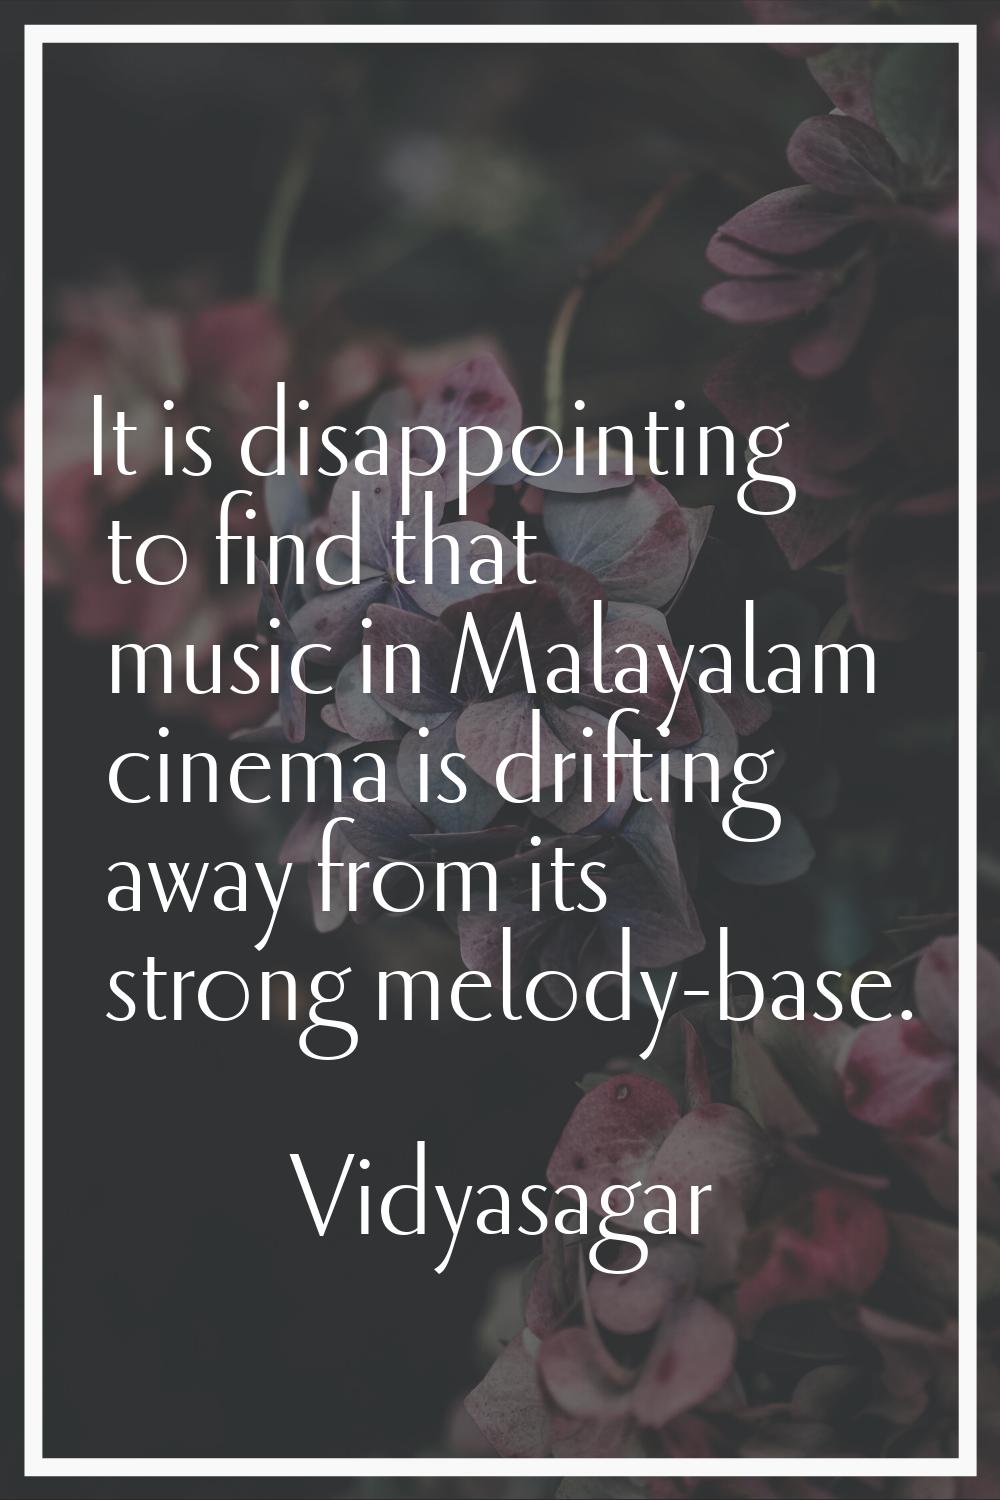 It is disappointing to find that music in Malayalam cinema is drifting away from its strong melody-